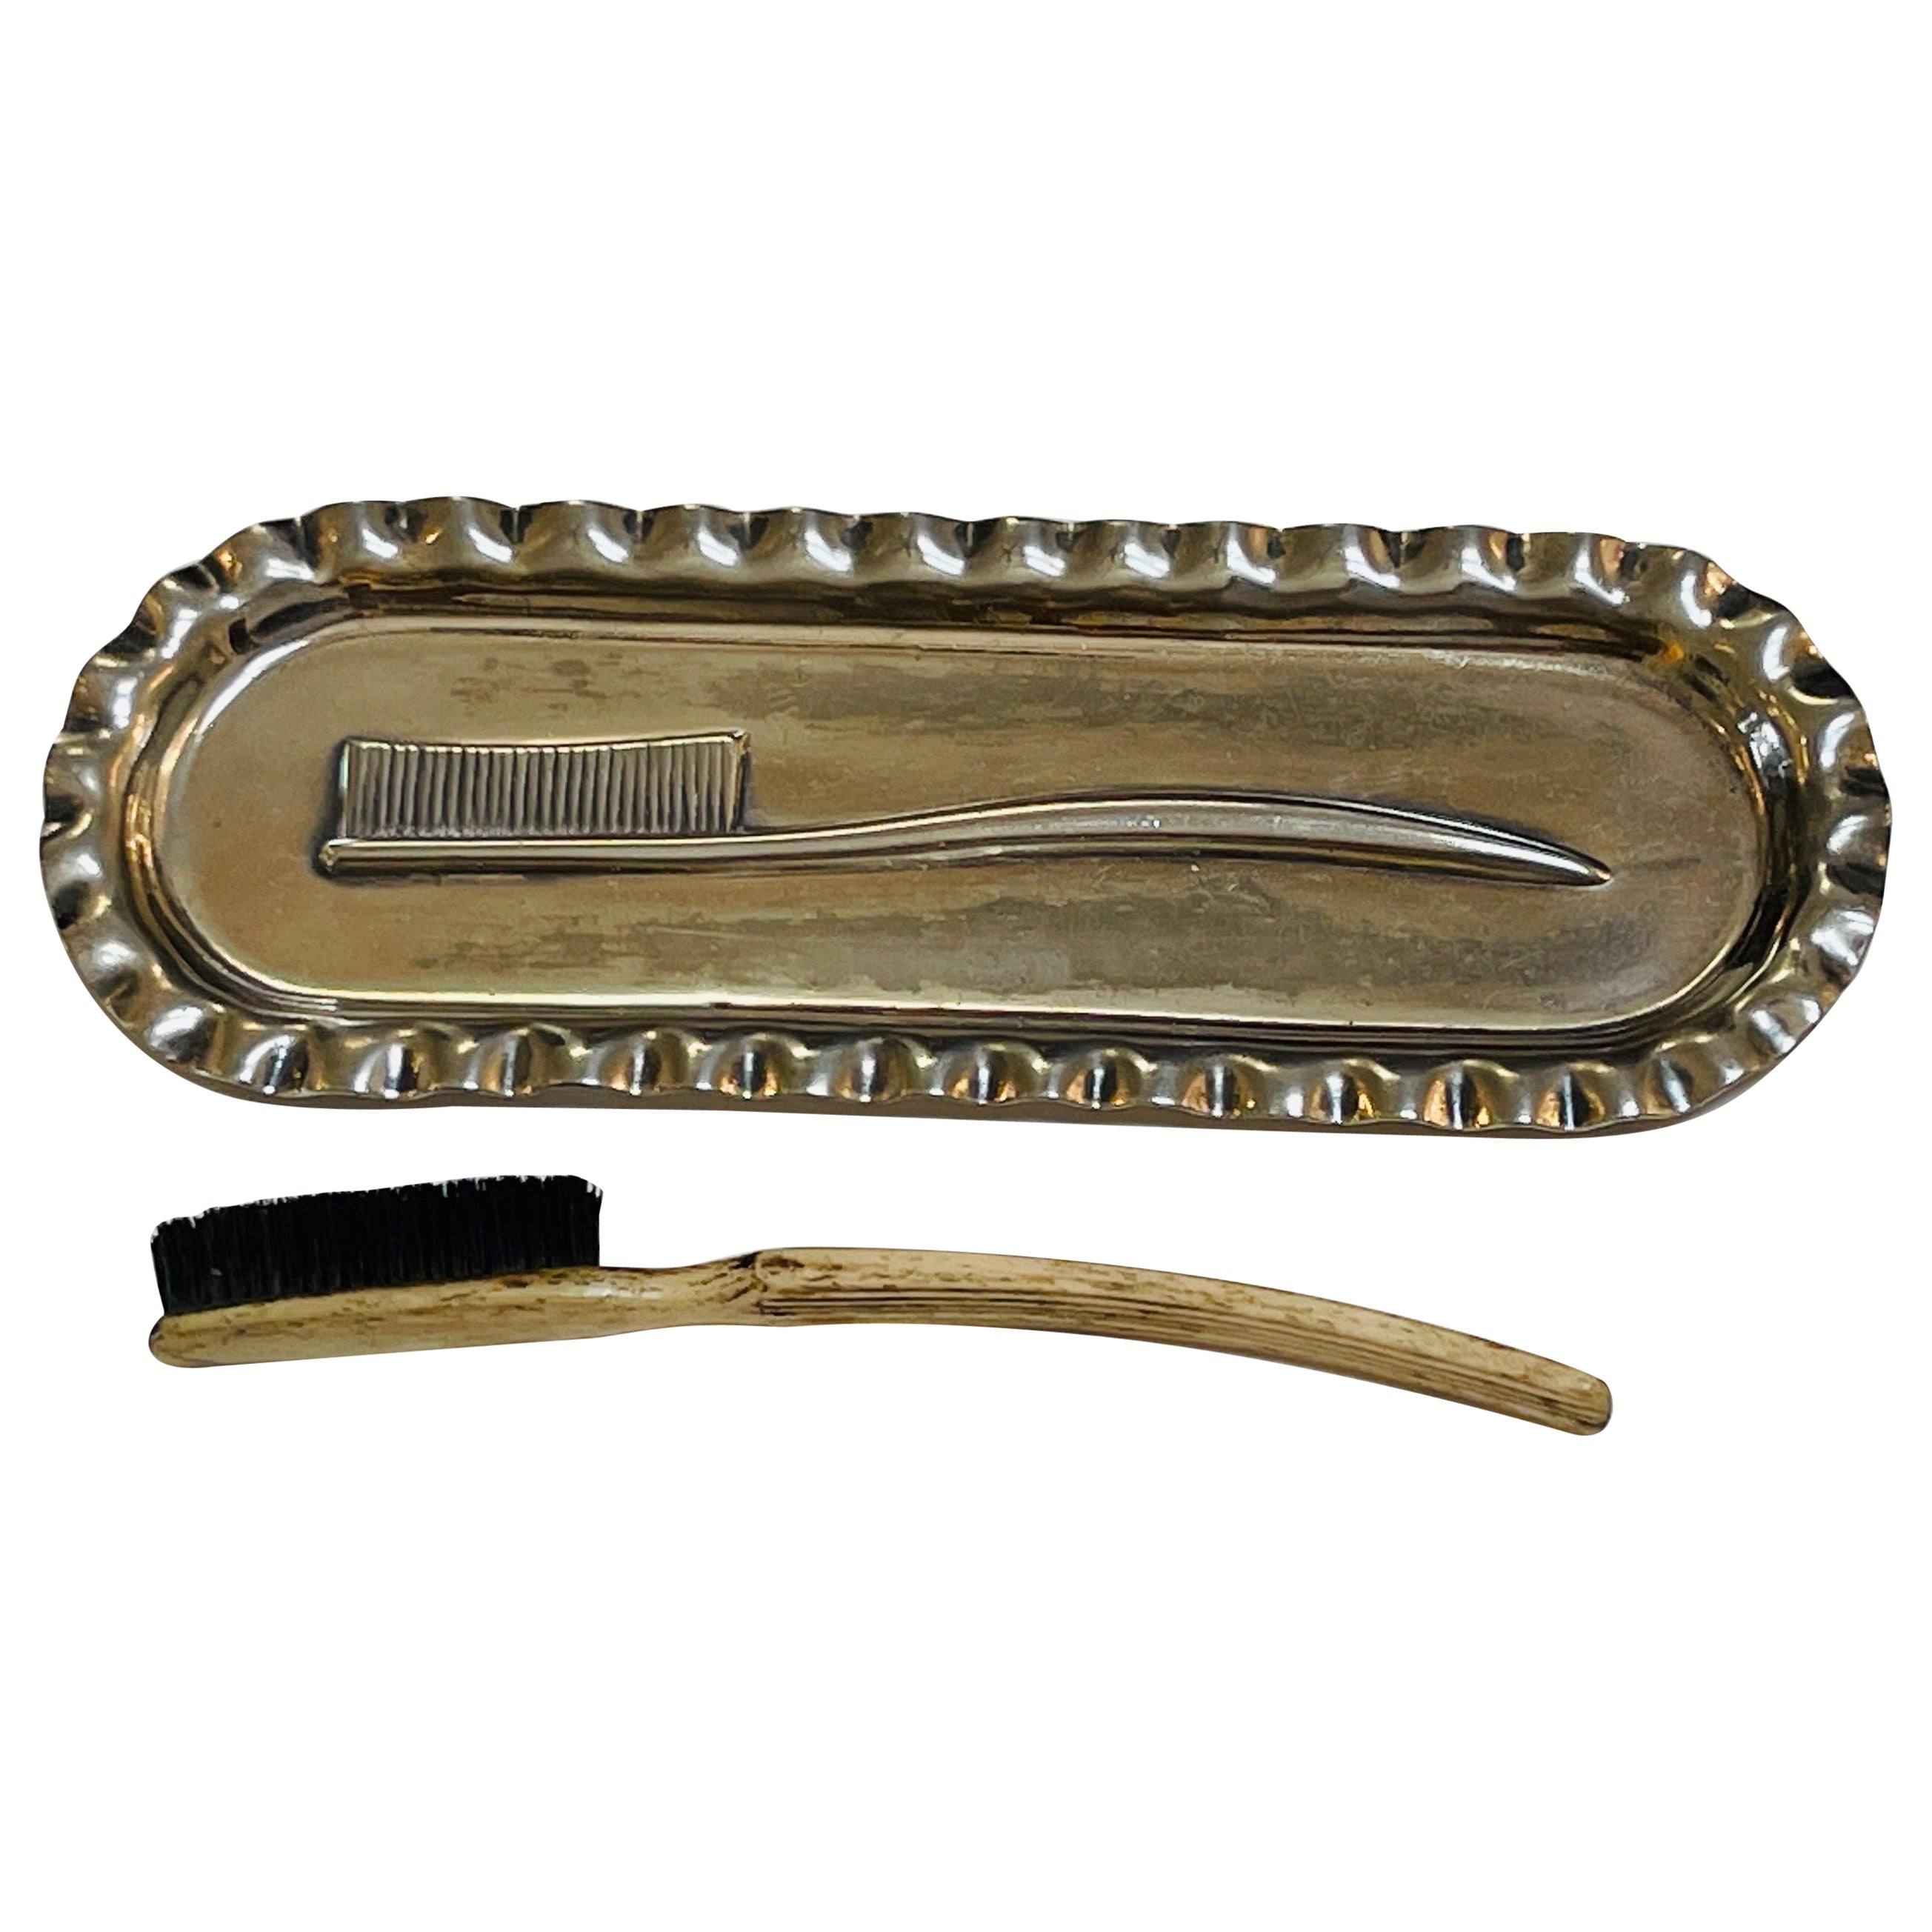 Victorian Silverplated Toothbrush Tray & Brush Set by James W. Tufts Co, Boston For Sale